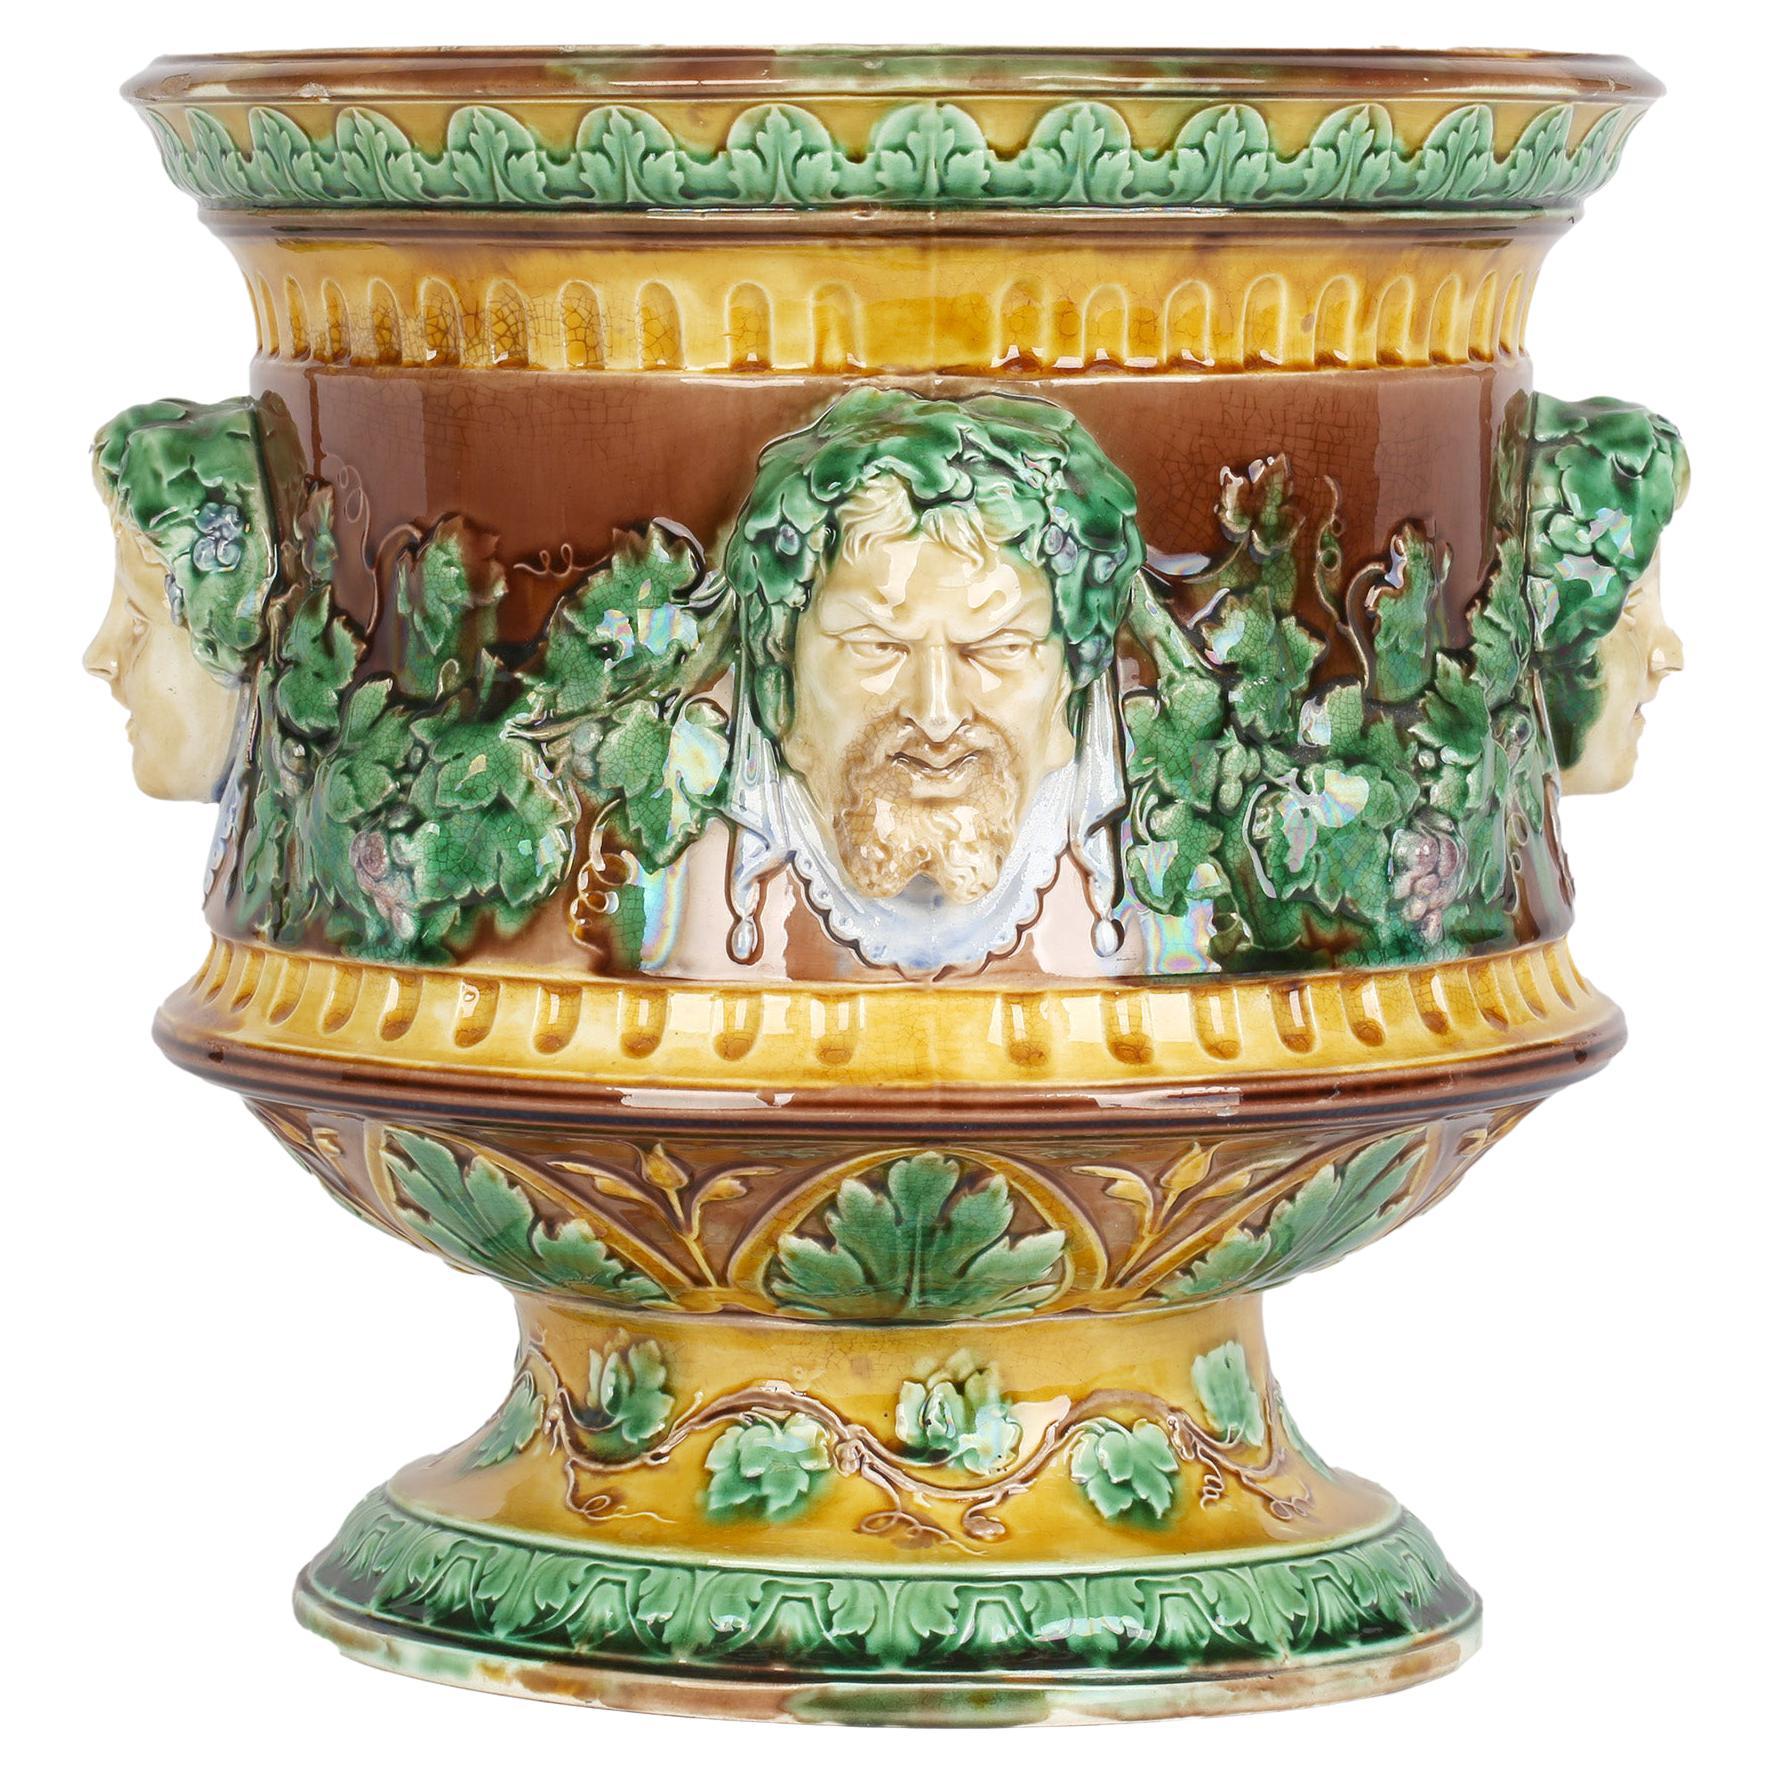 Wedgwood Large and Impressive Majolica Jardiniere with Masks and Trailing Vines For Sale